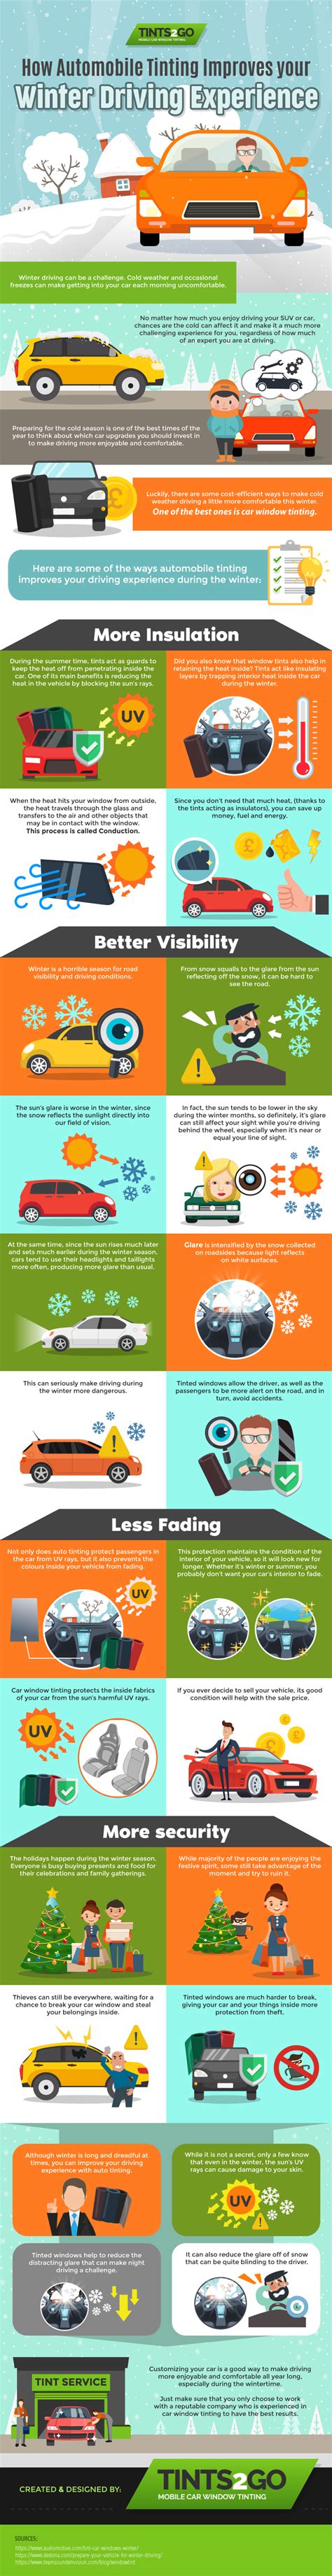 How Automobile Tinting Improves Your Winter Driving Experience